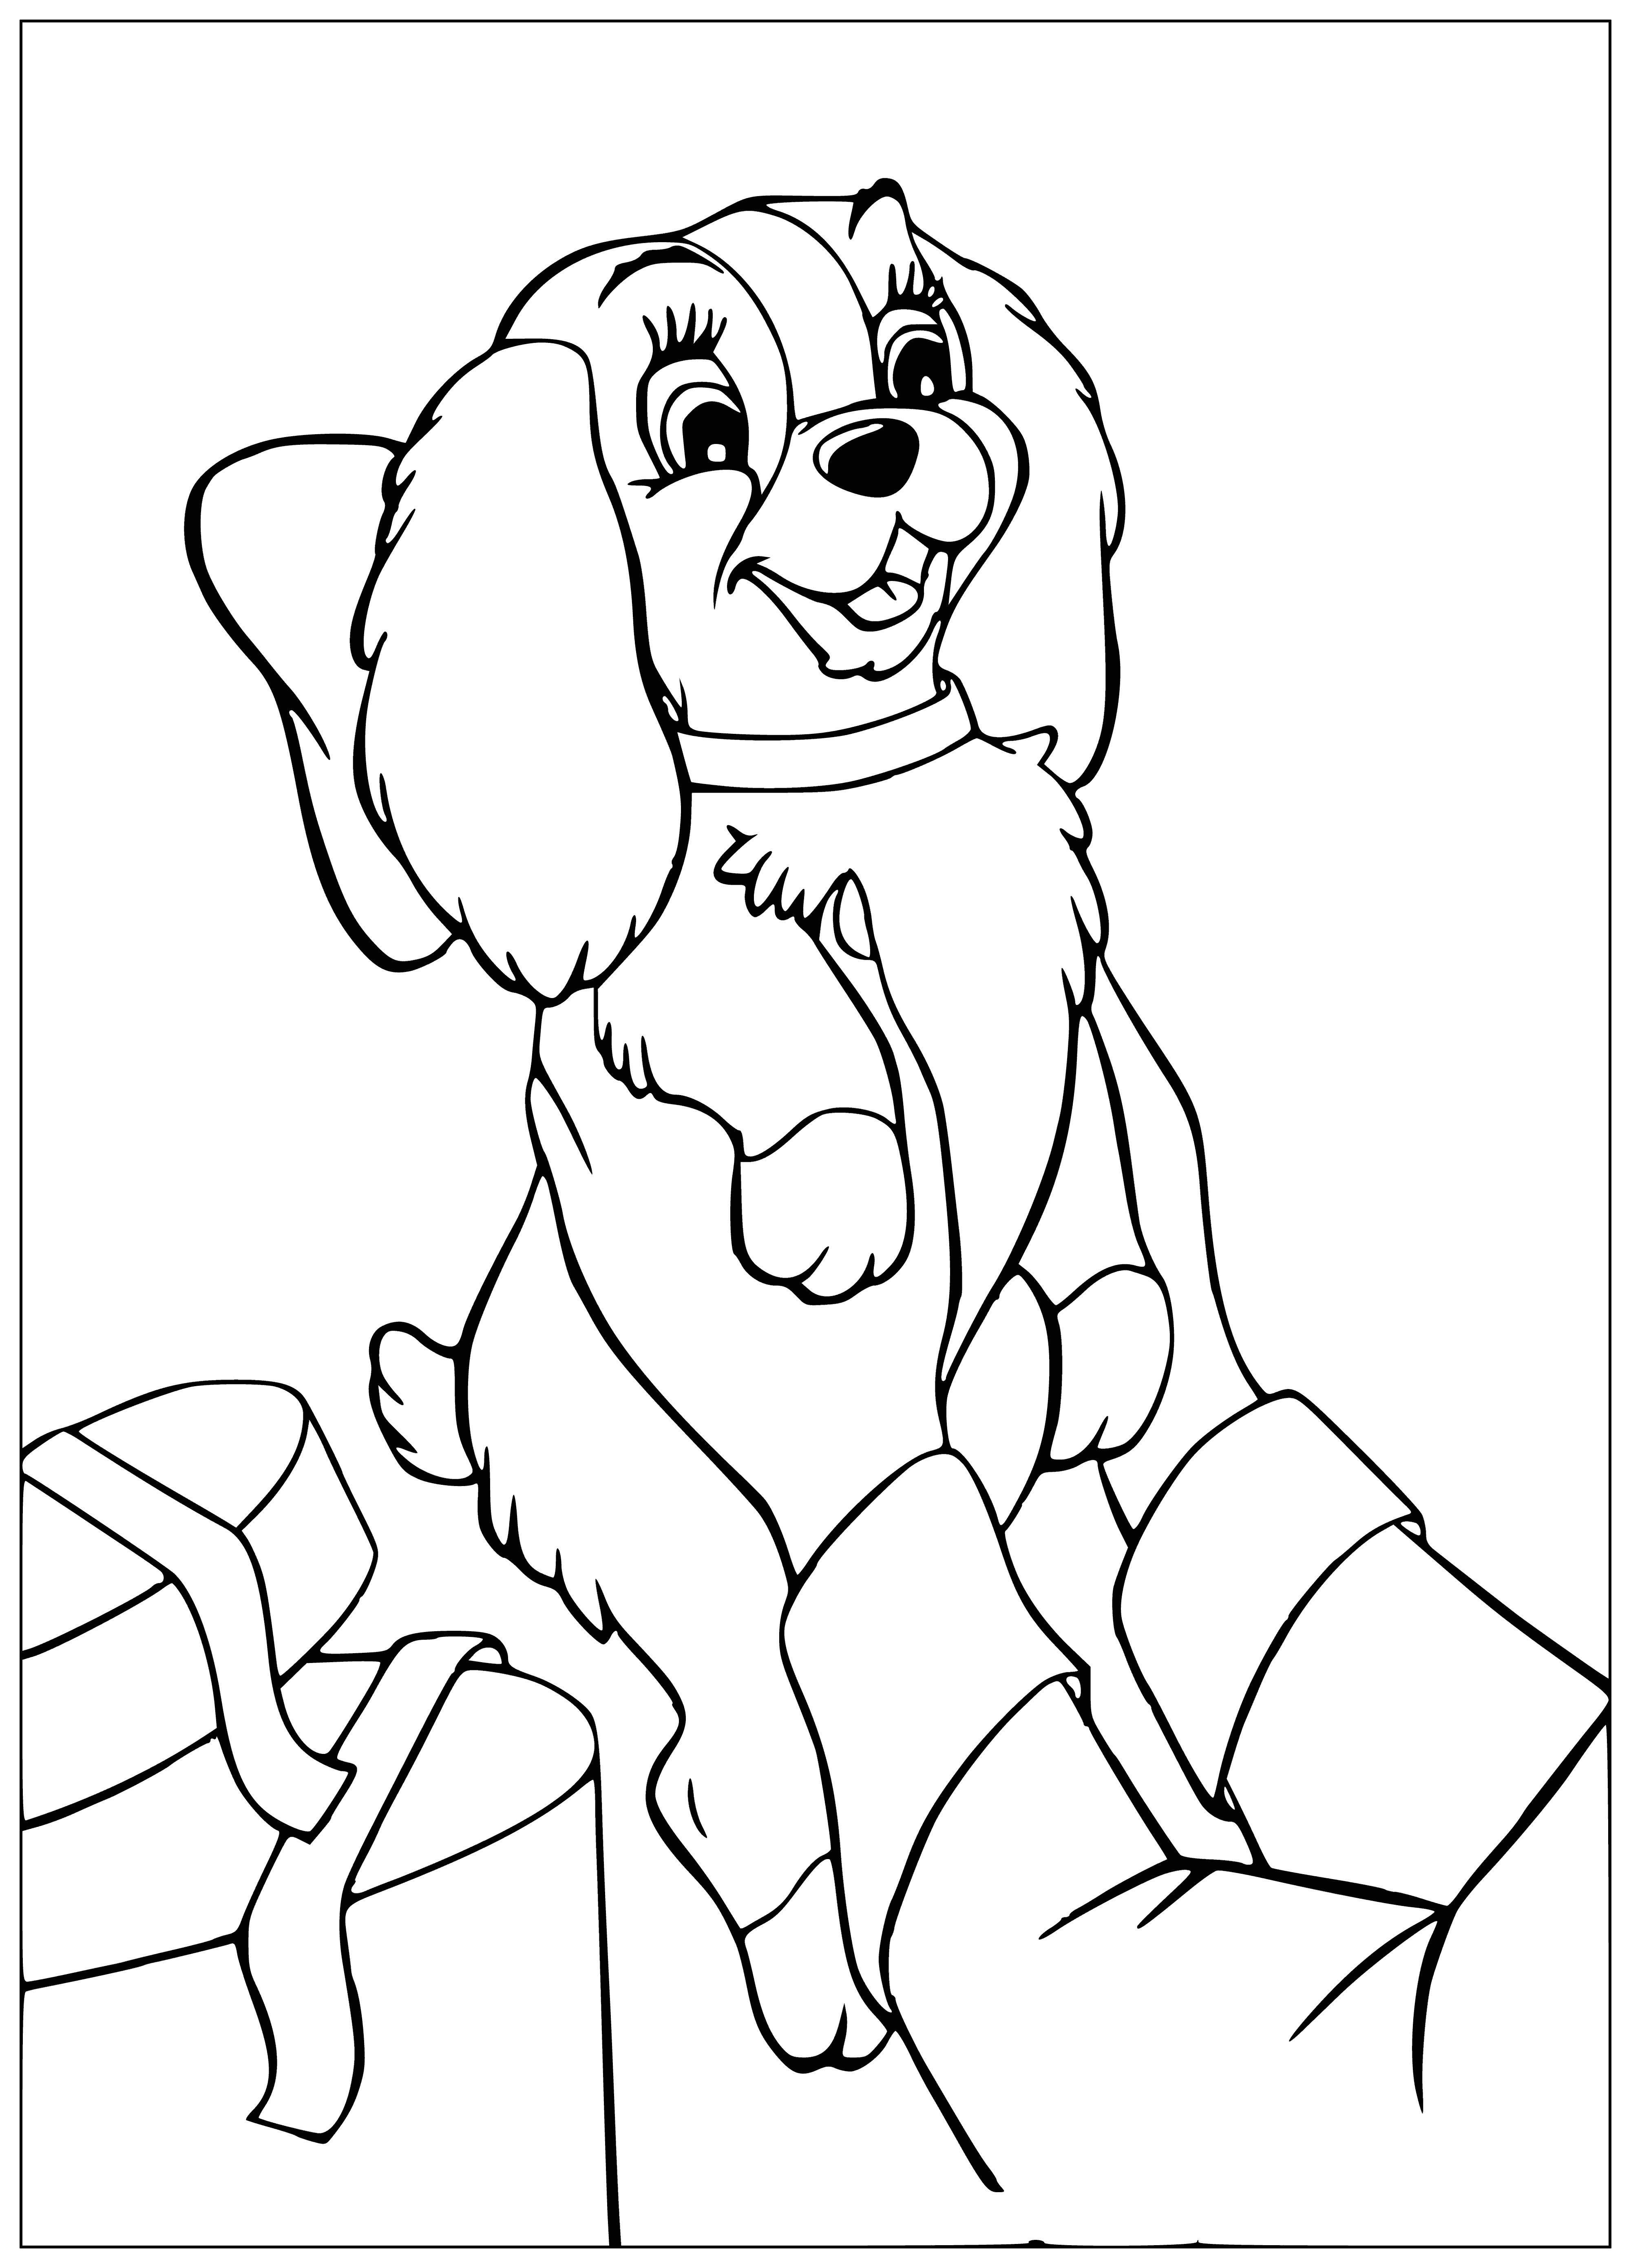 Puppy from a gift coloring page